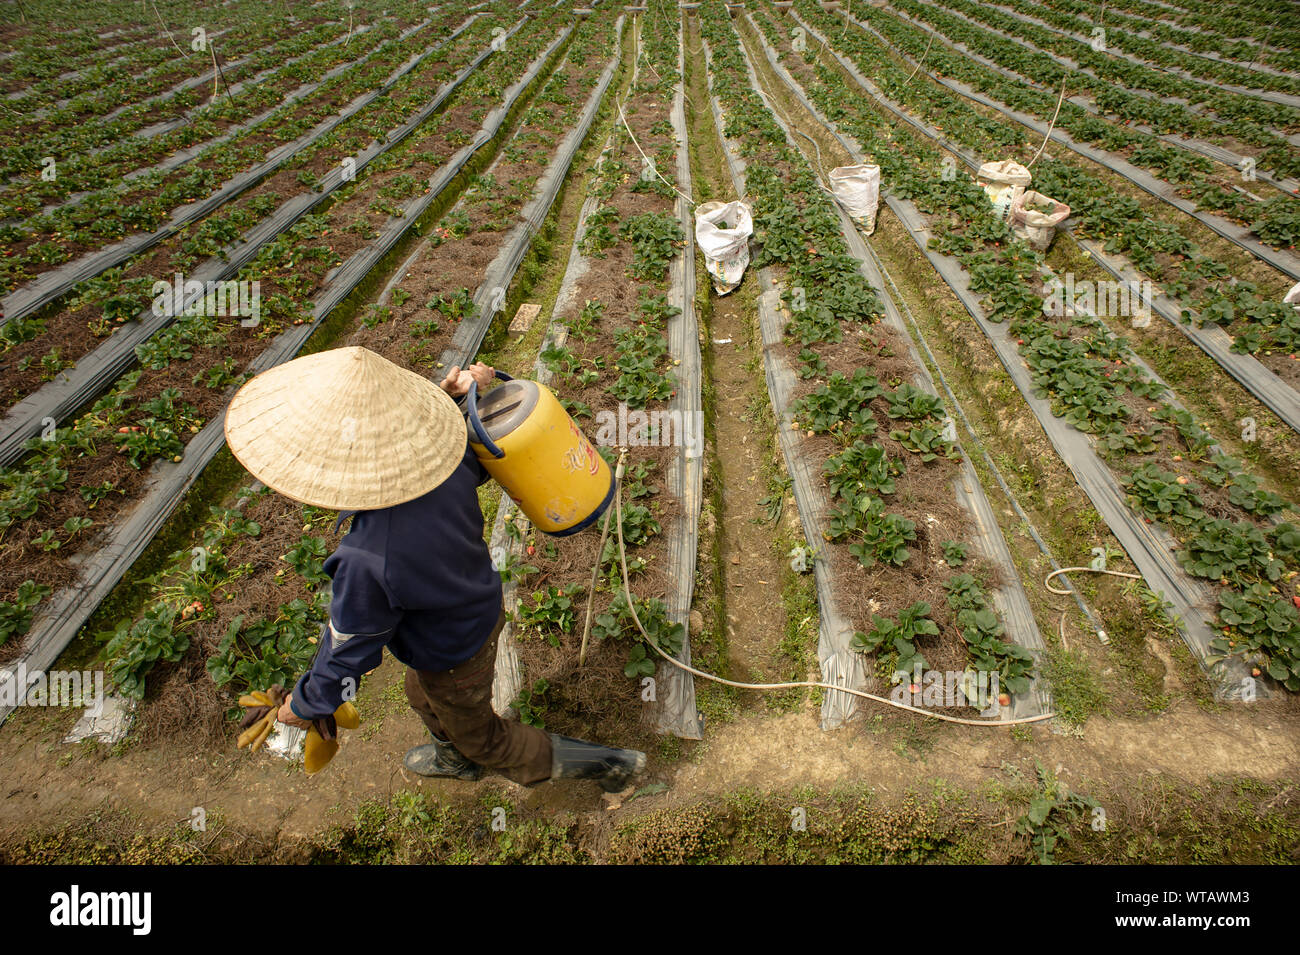 Woman works on strawberry field wearing traditional Asian hat Stock Photo